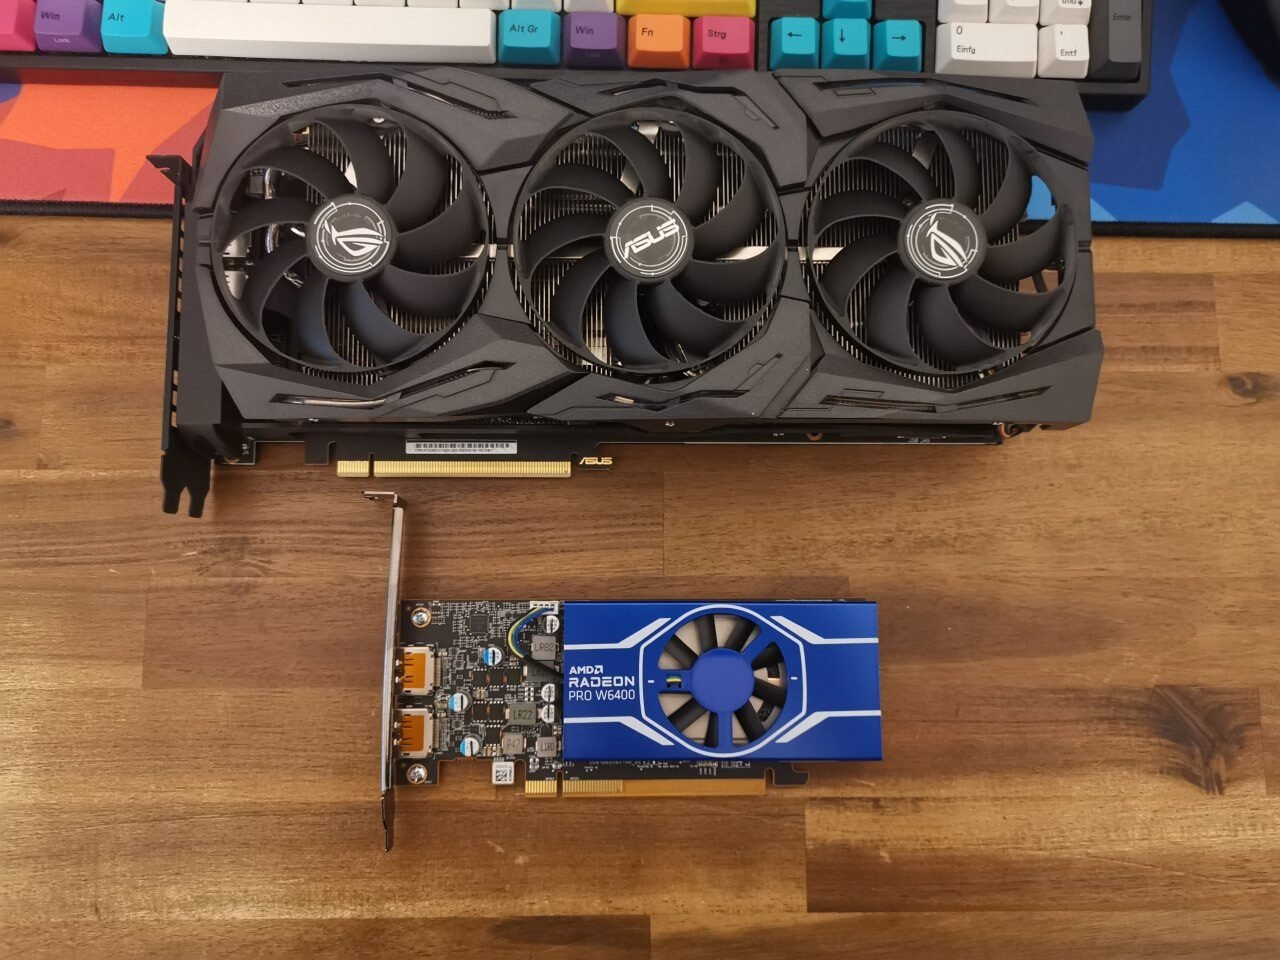 The AMD Radeon Pro W6400 is extremely small